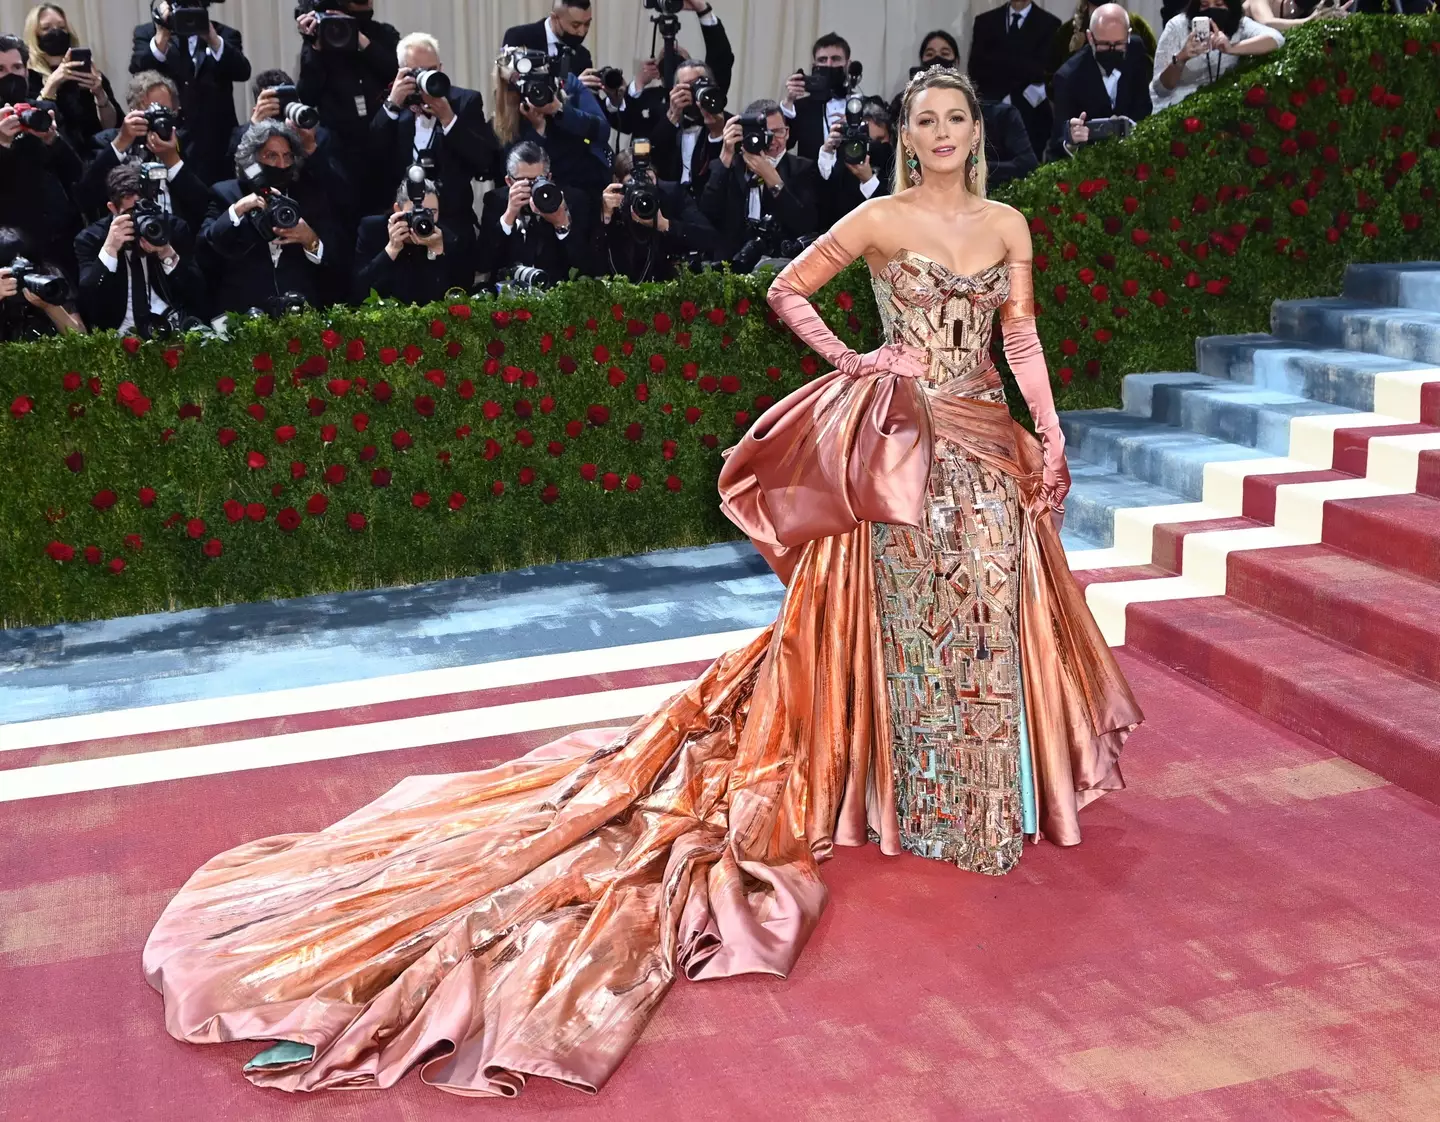 Gossip Girl star Blake Lively will play Lily Bloom.